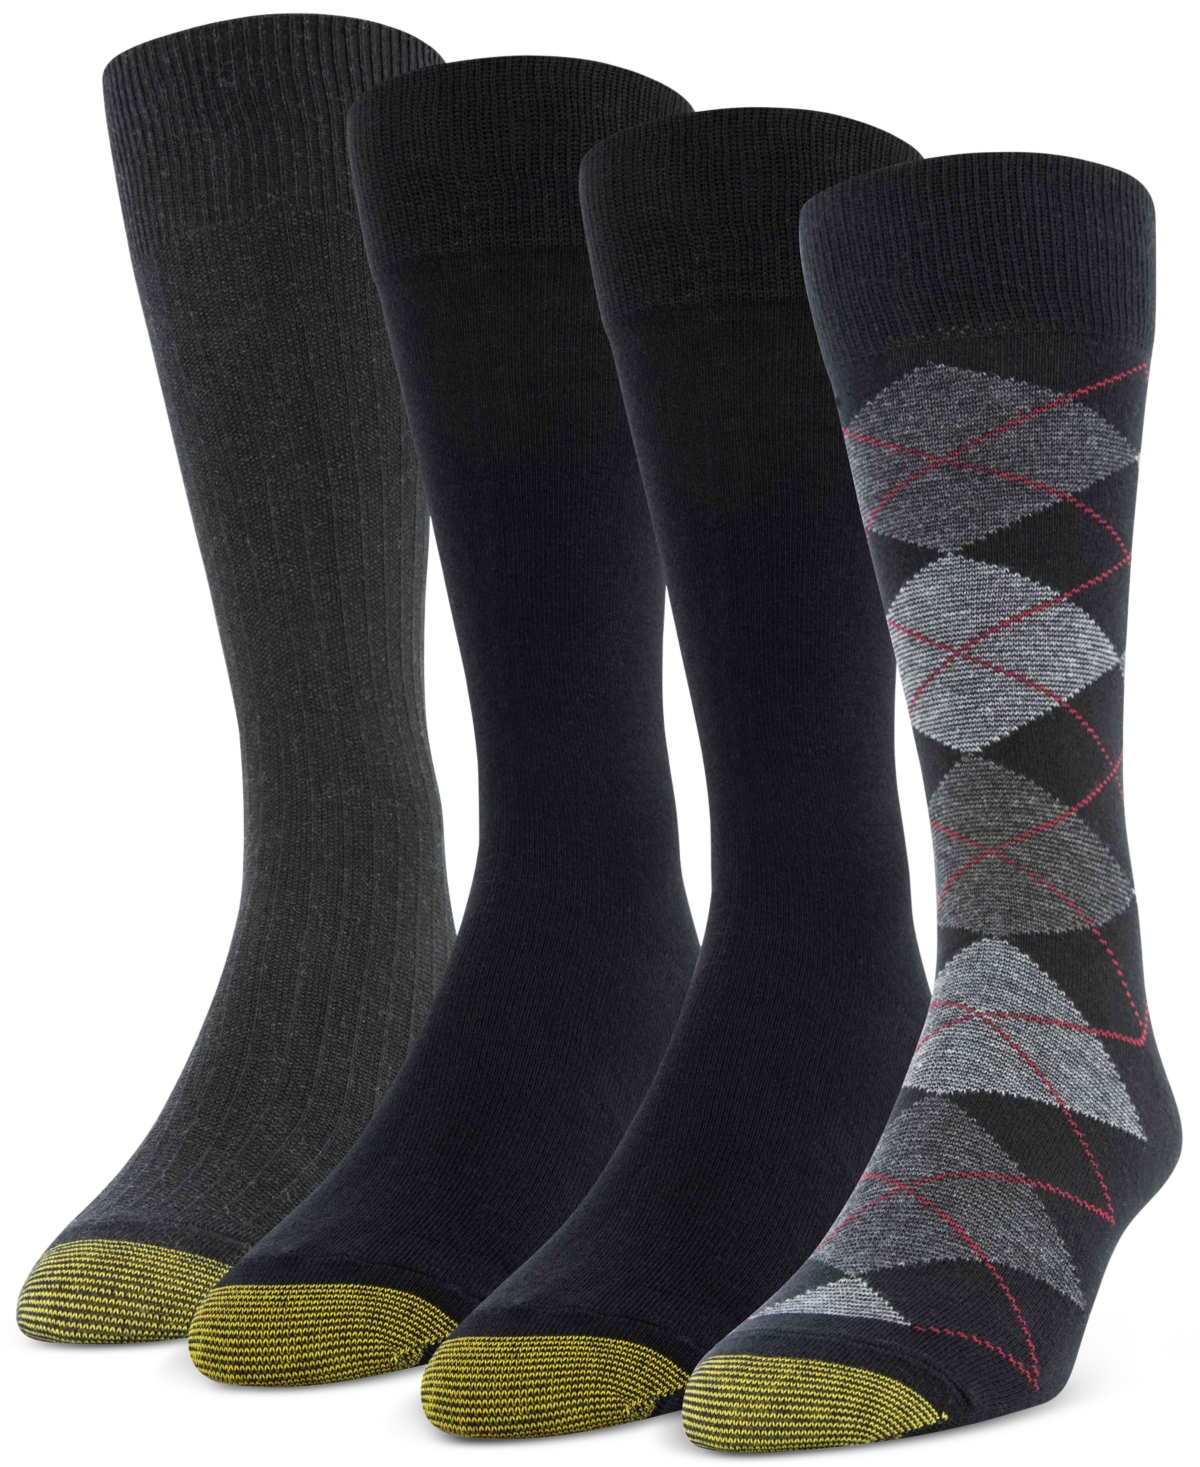 Men's 4-Pack Casual Argyle Crew Socks - Brown Heather, Taupe Heather, Taupe, Bro